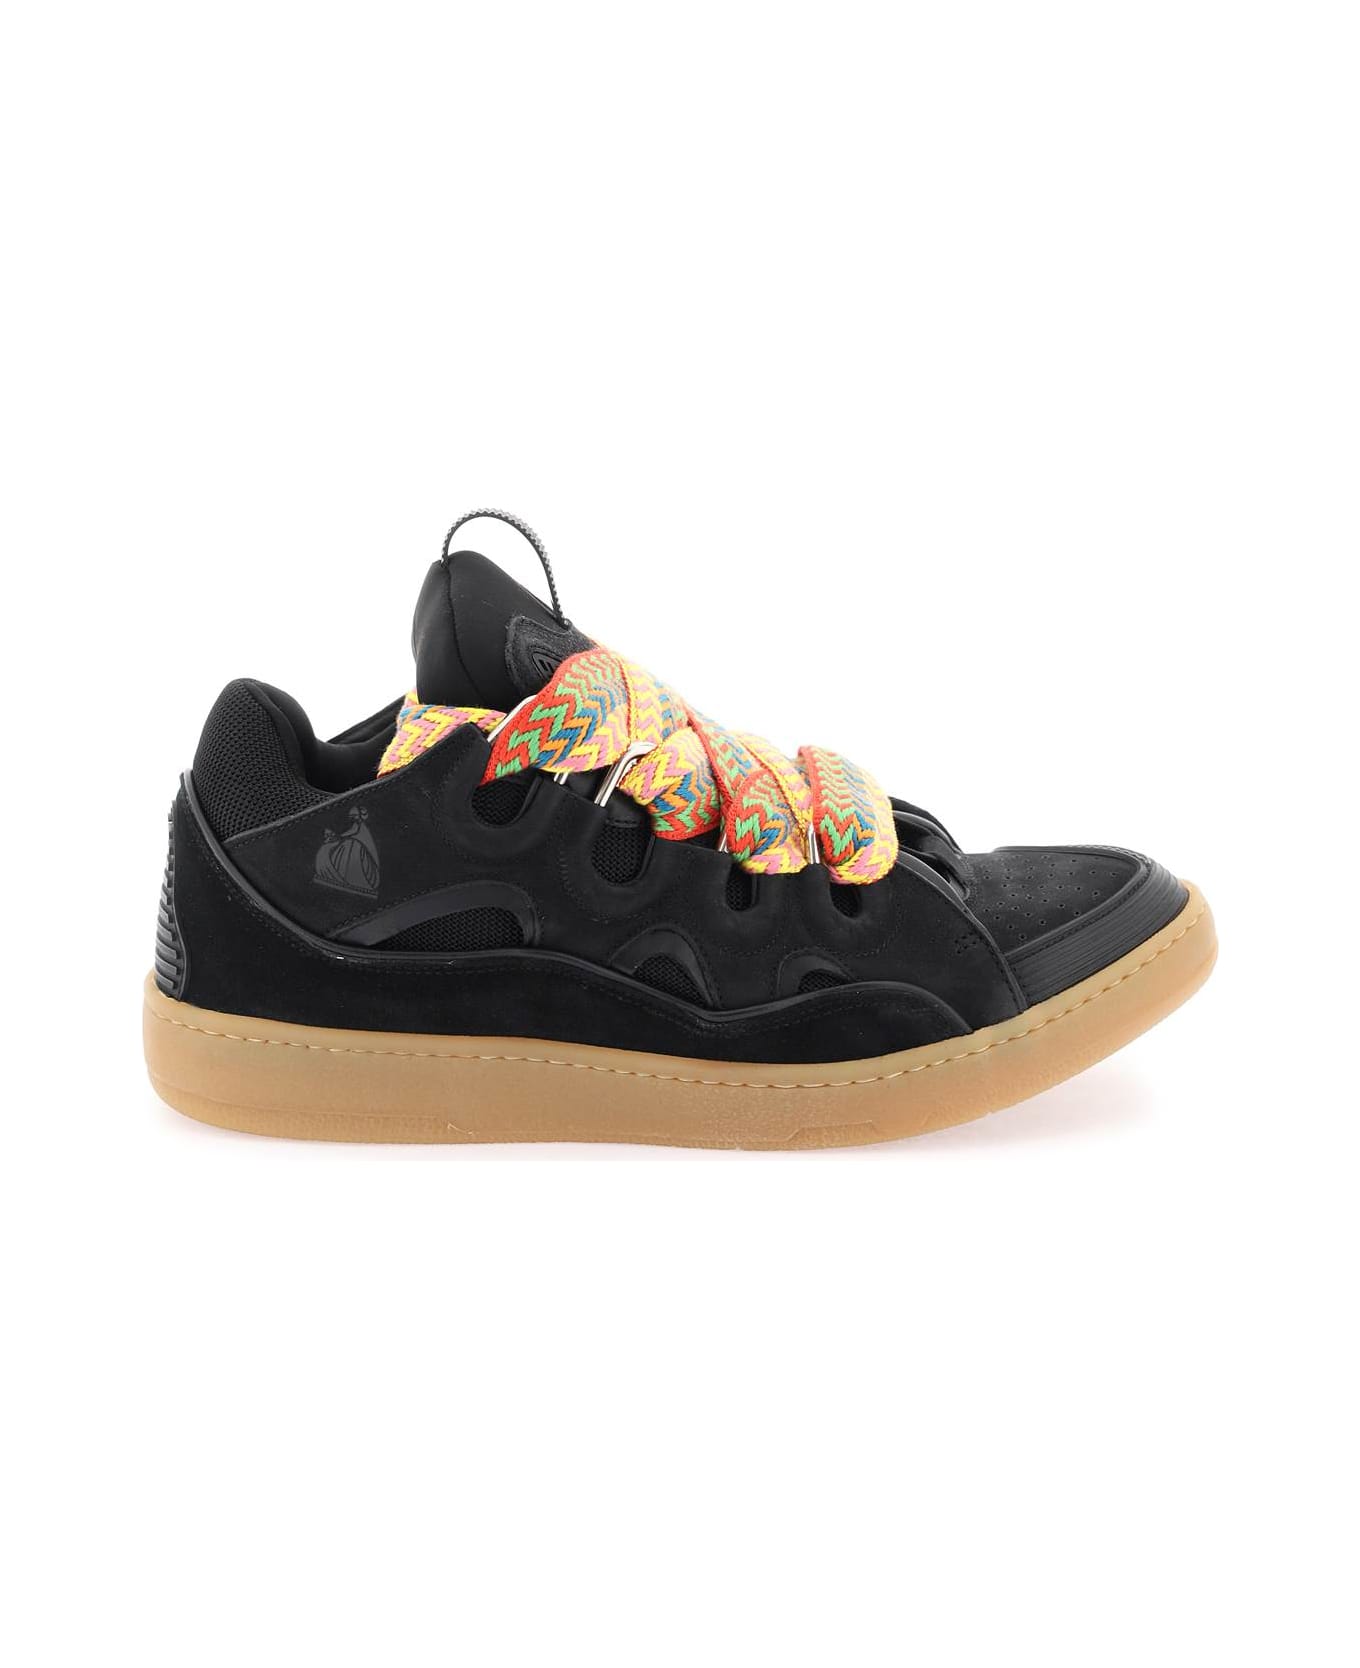 Lanvin 'curb' Sneakers In Black Leather - Black